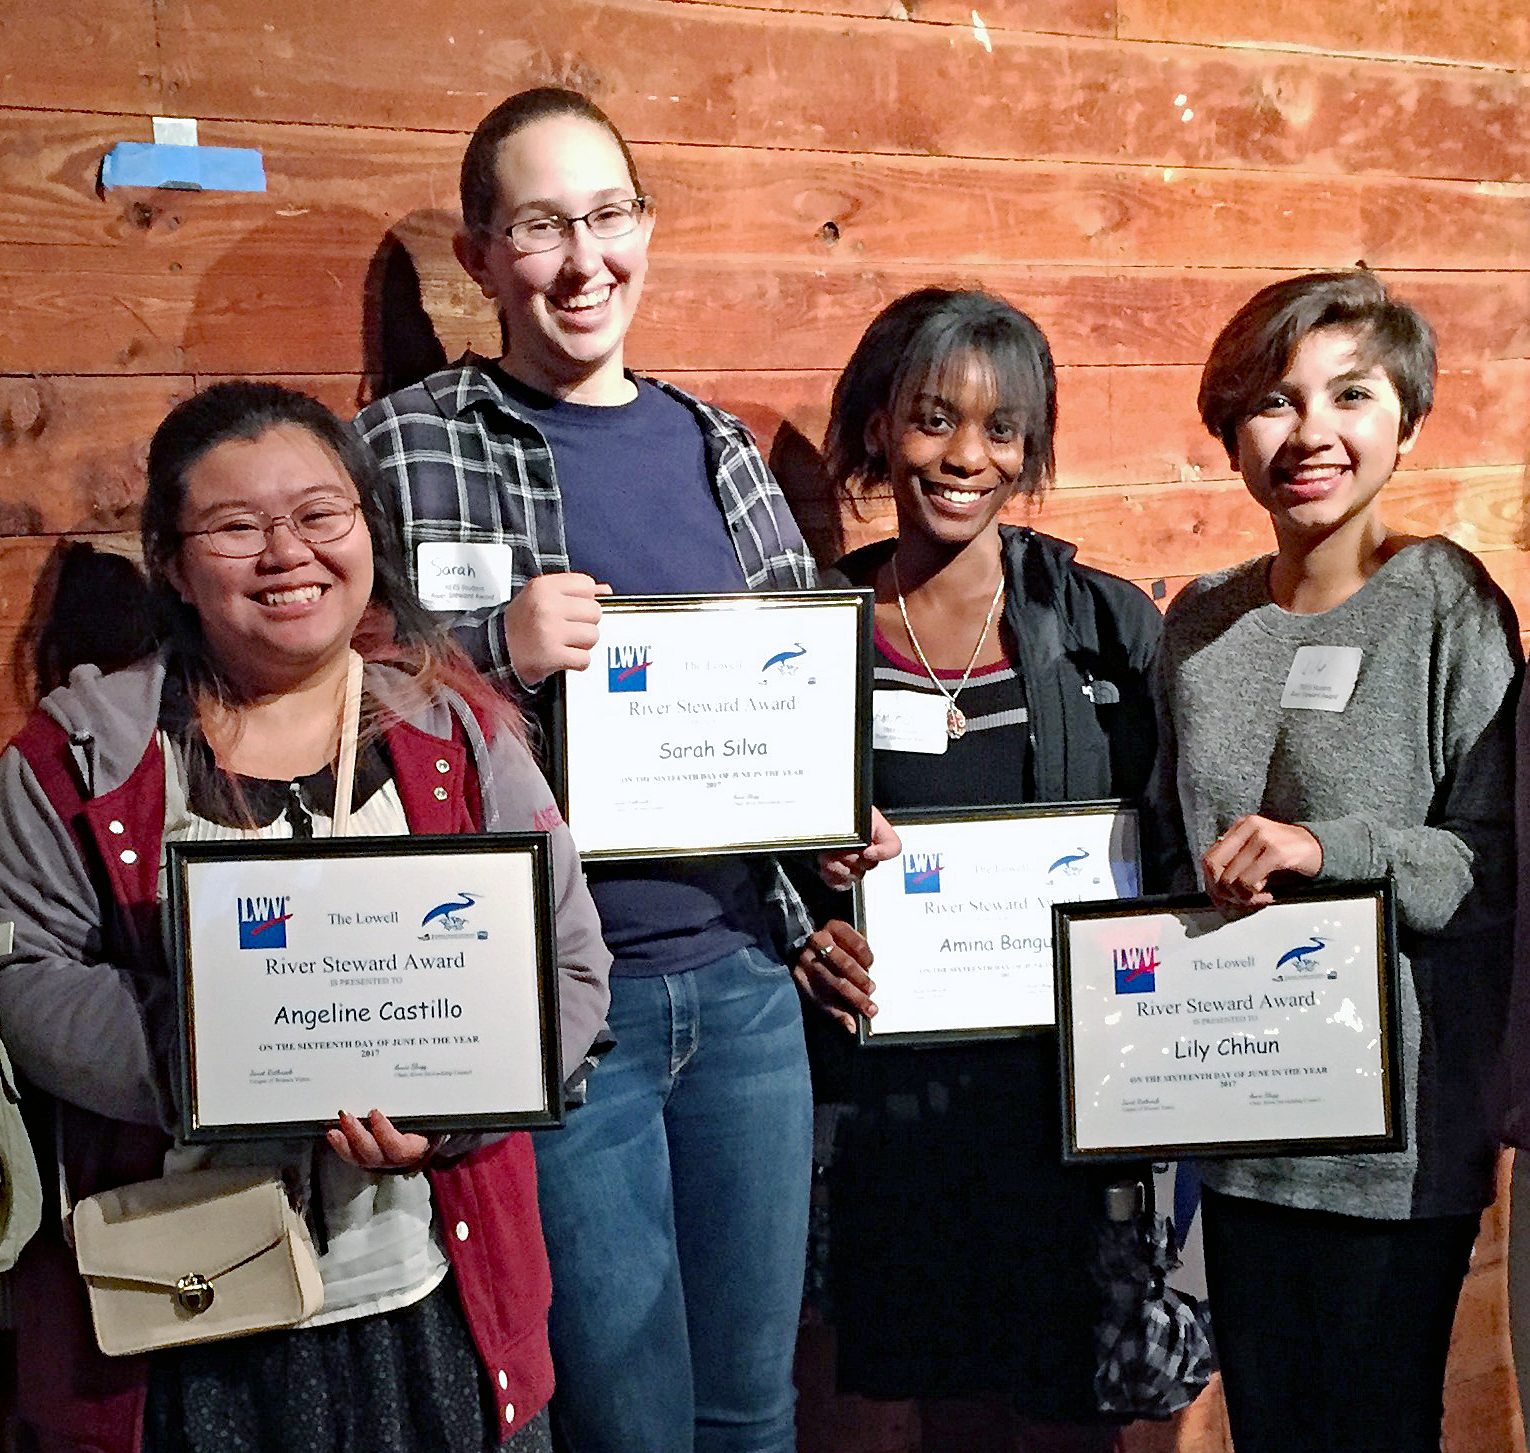 5 high school students hold up "River Steward Awards", smiling by a wooden plank wall